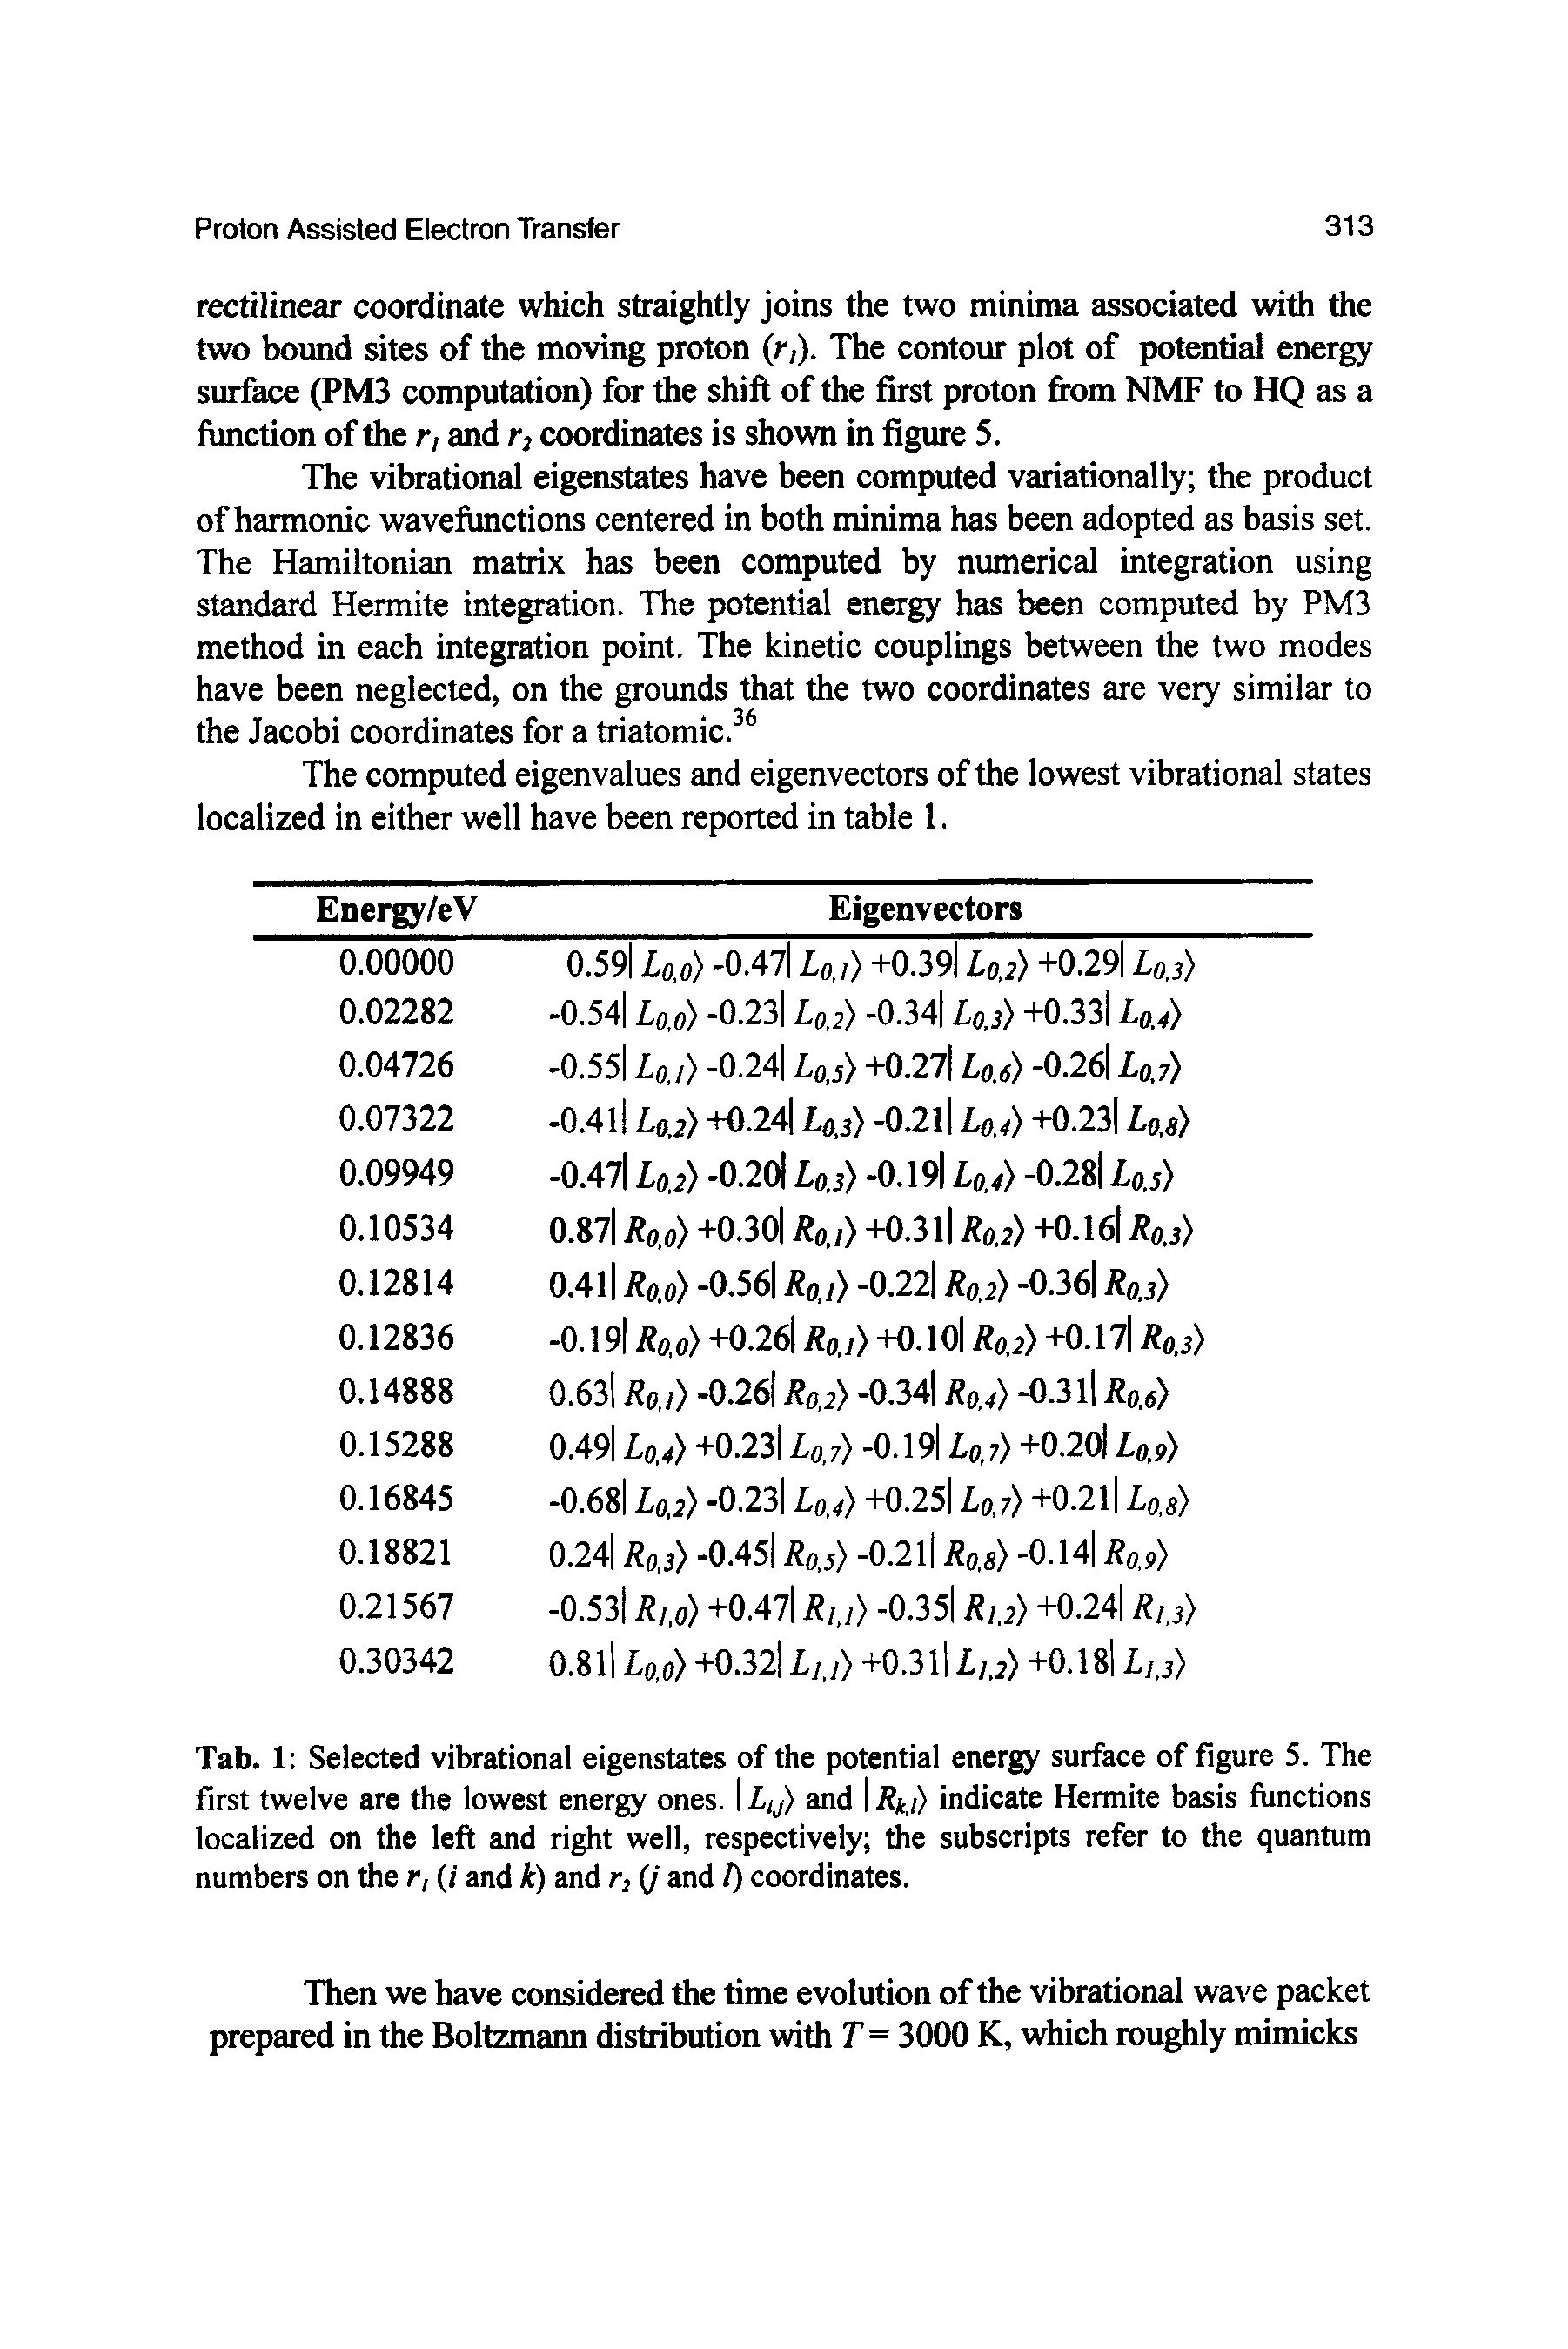 Tab. 1 Selected vibrational eigenstates of the potential energy surface of figure 5. The first twelve are the lowest energy ones. 1 iy> and 1 , /> indicate Hermite basis functions localized on the left and right well, respectively the subscripts refer to the quantum numbers on the r, (i and k) and rj (/ and /) coordinates.